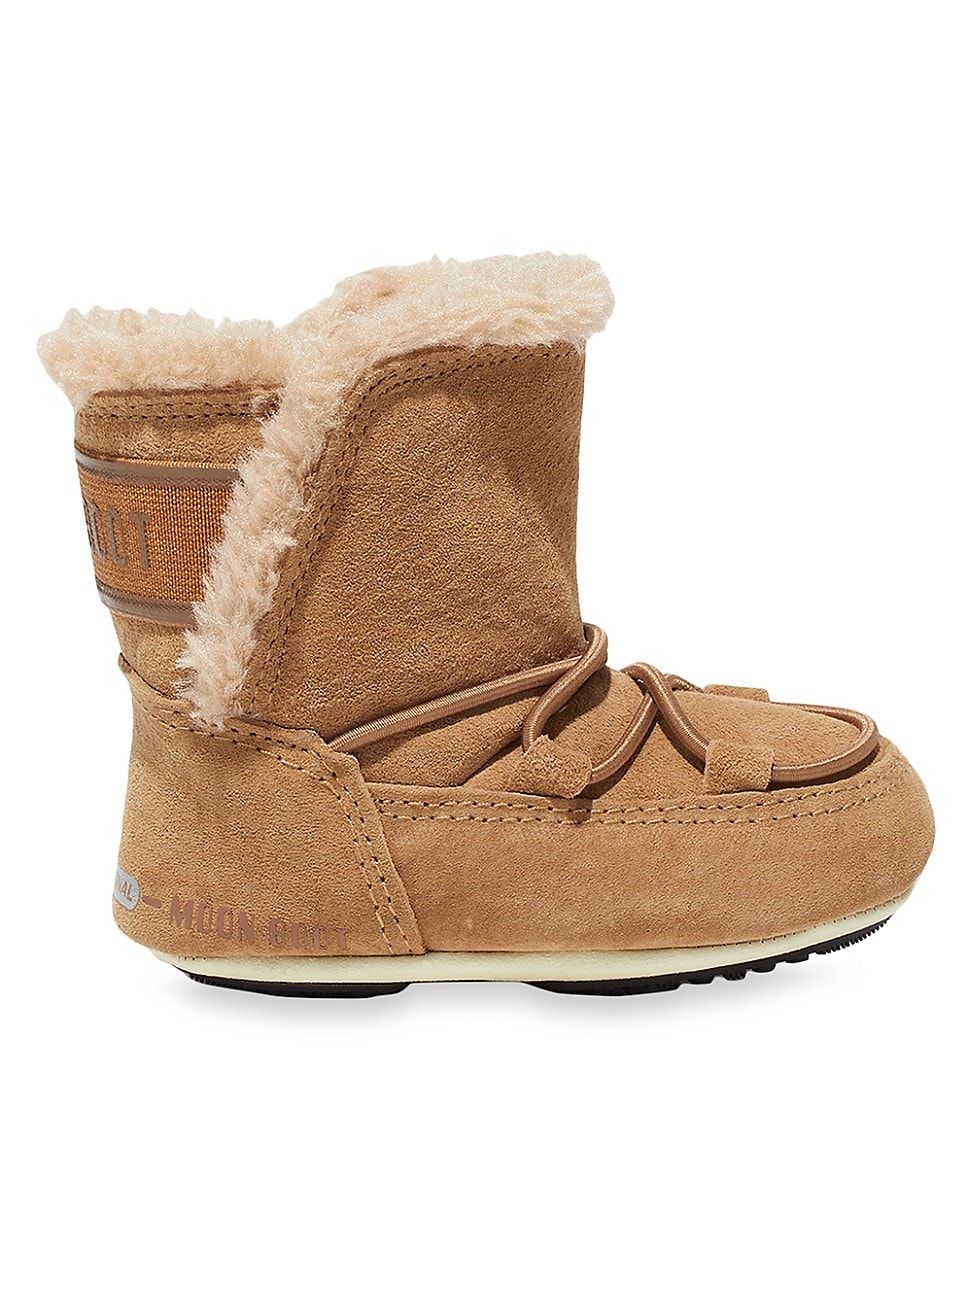 Baby's Suede Crib Boots - Whisky - Size 4 (Baby) | Saks Fifth Avenue